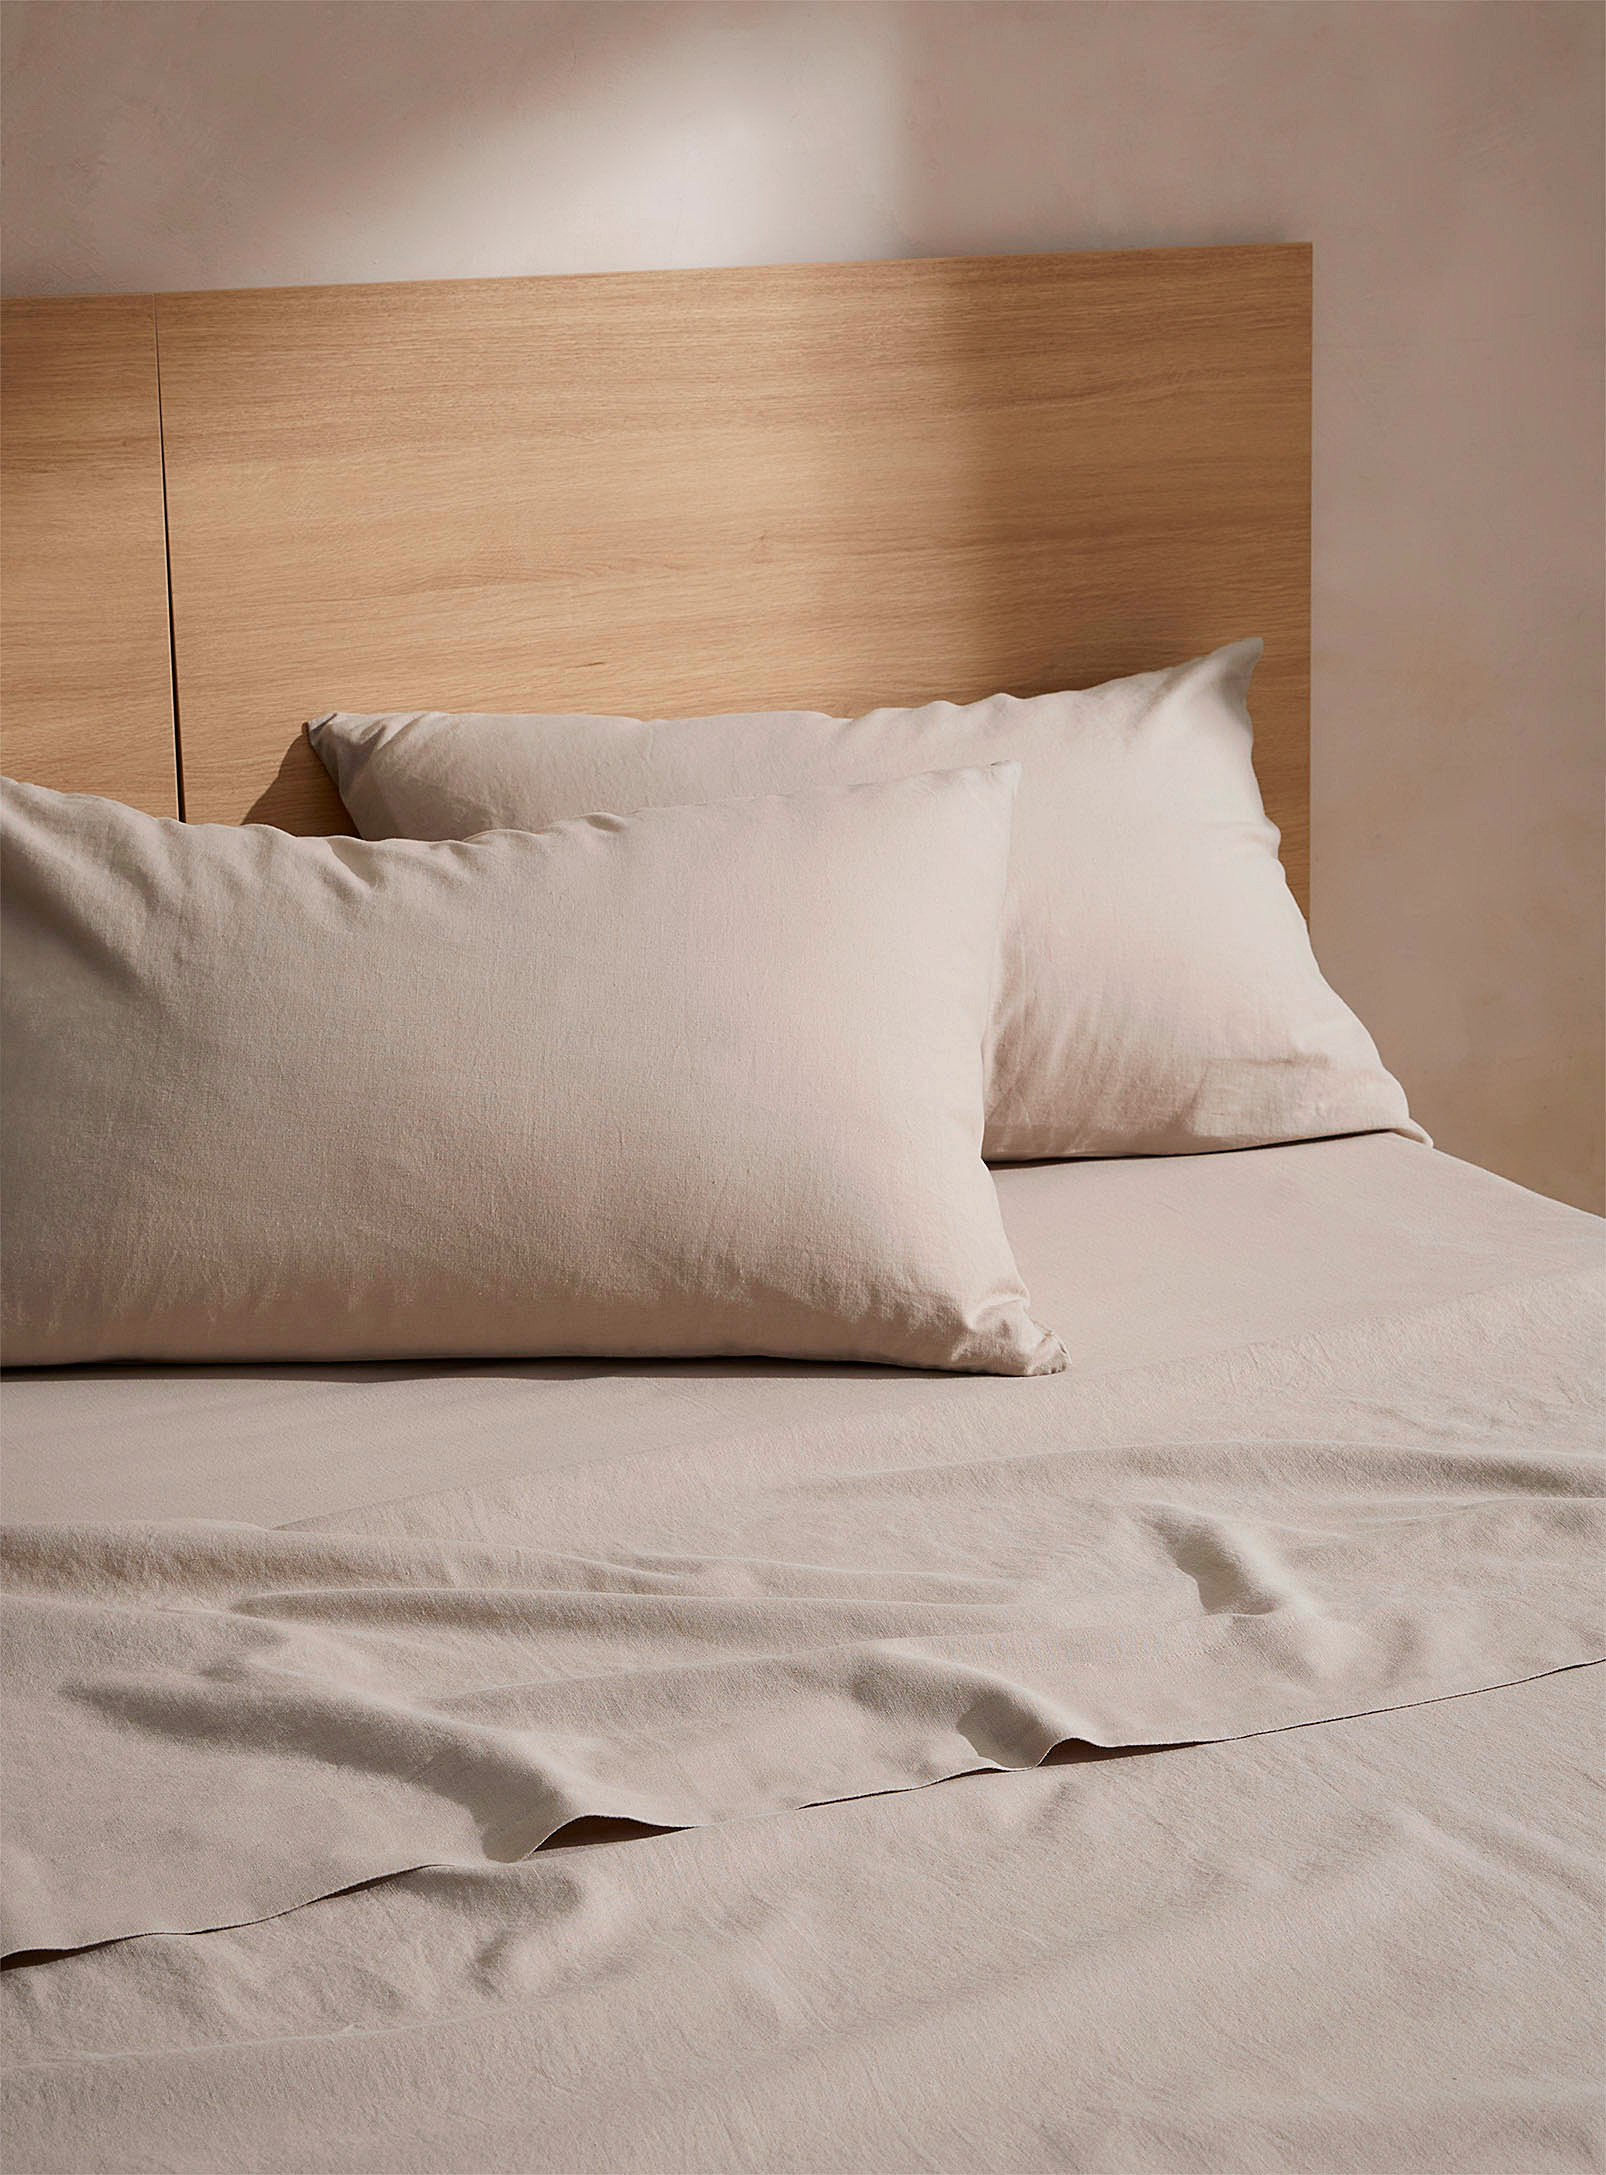 Wilet - Linen and cotton sheet set Fits mattresses up to 16 in